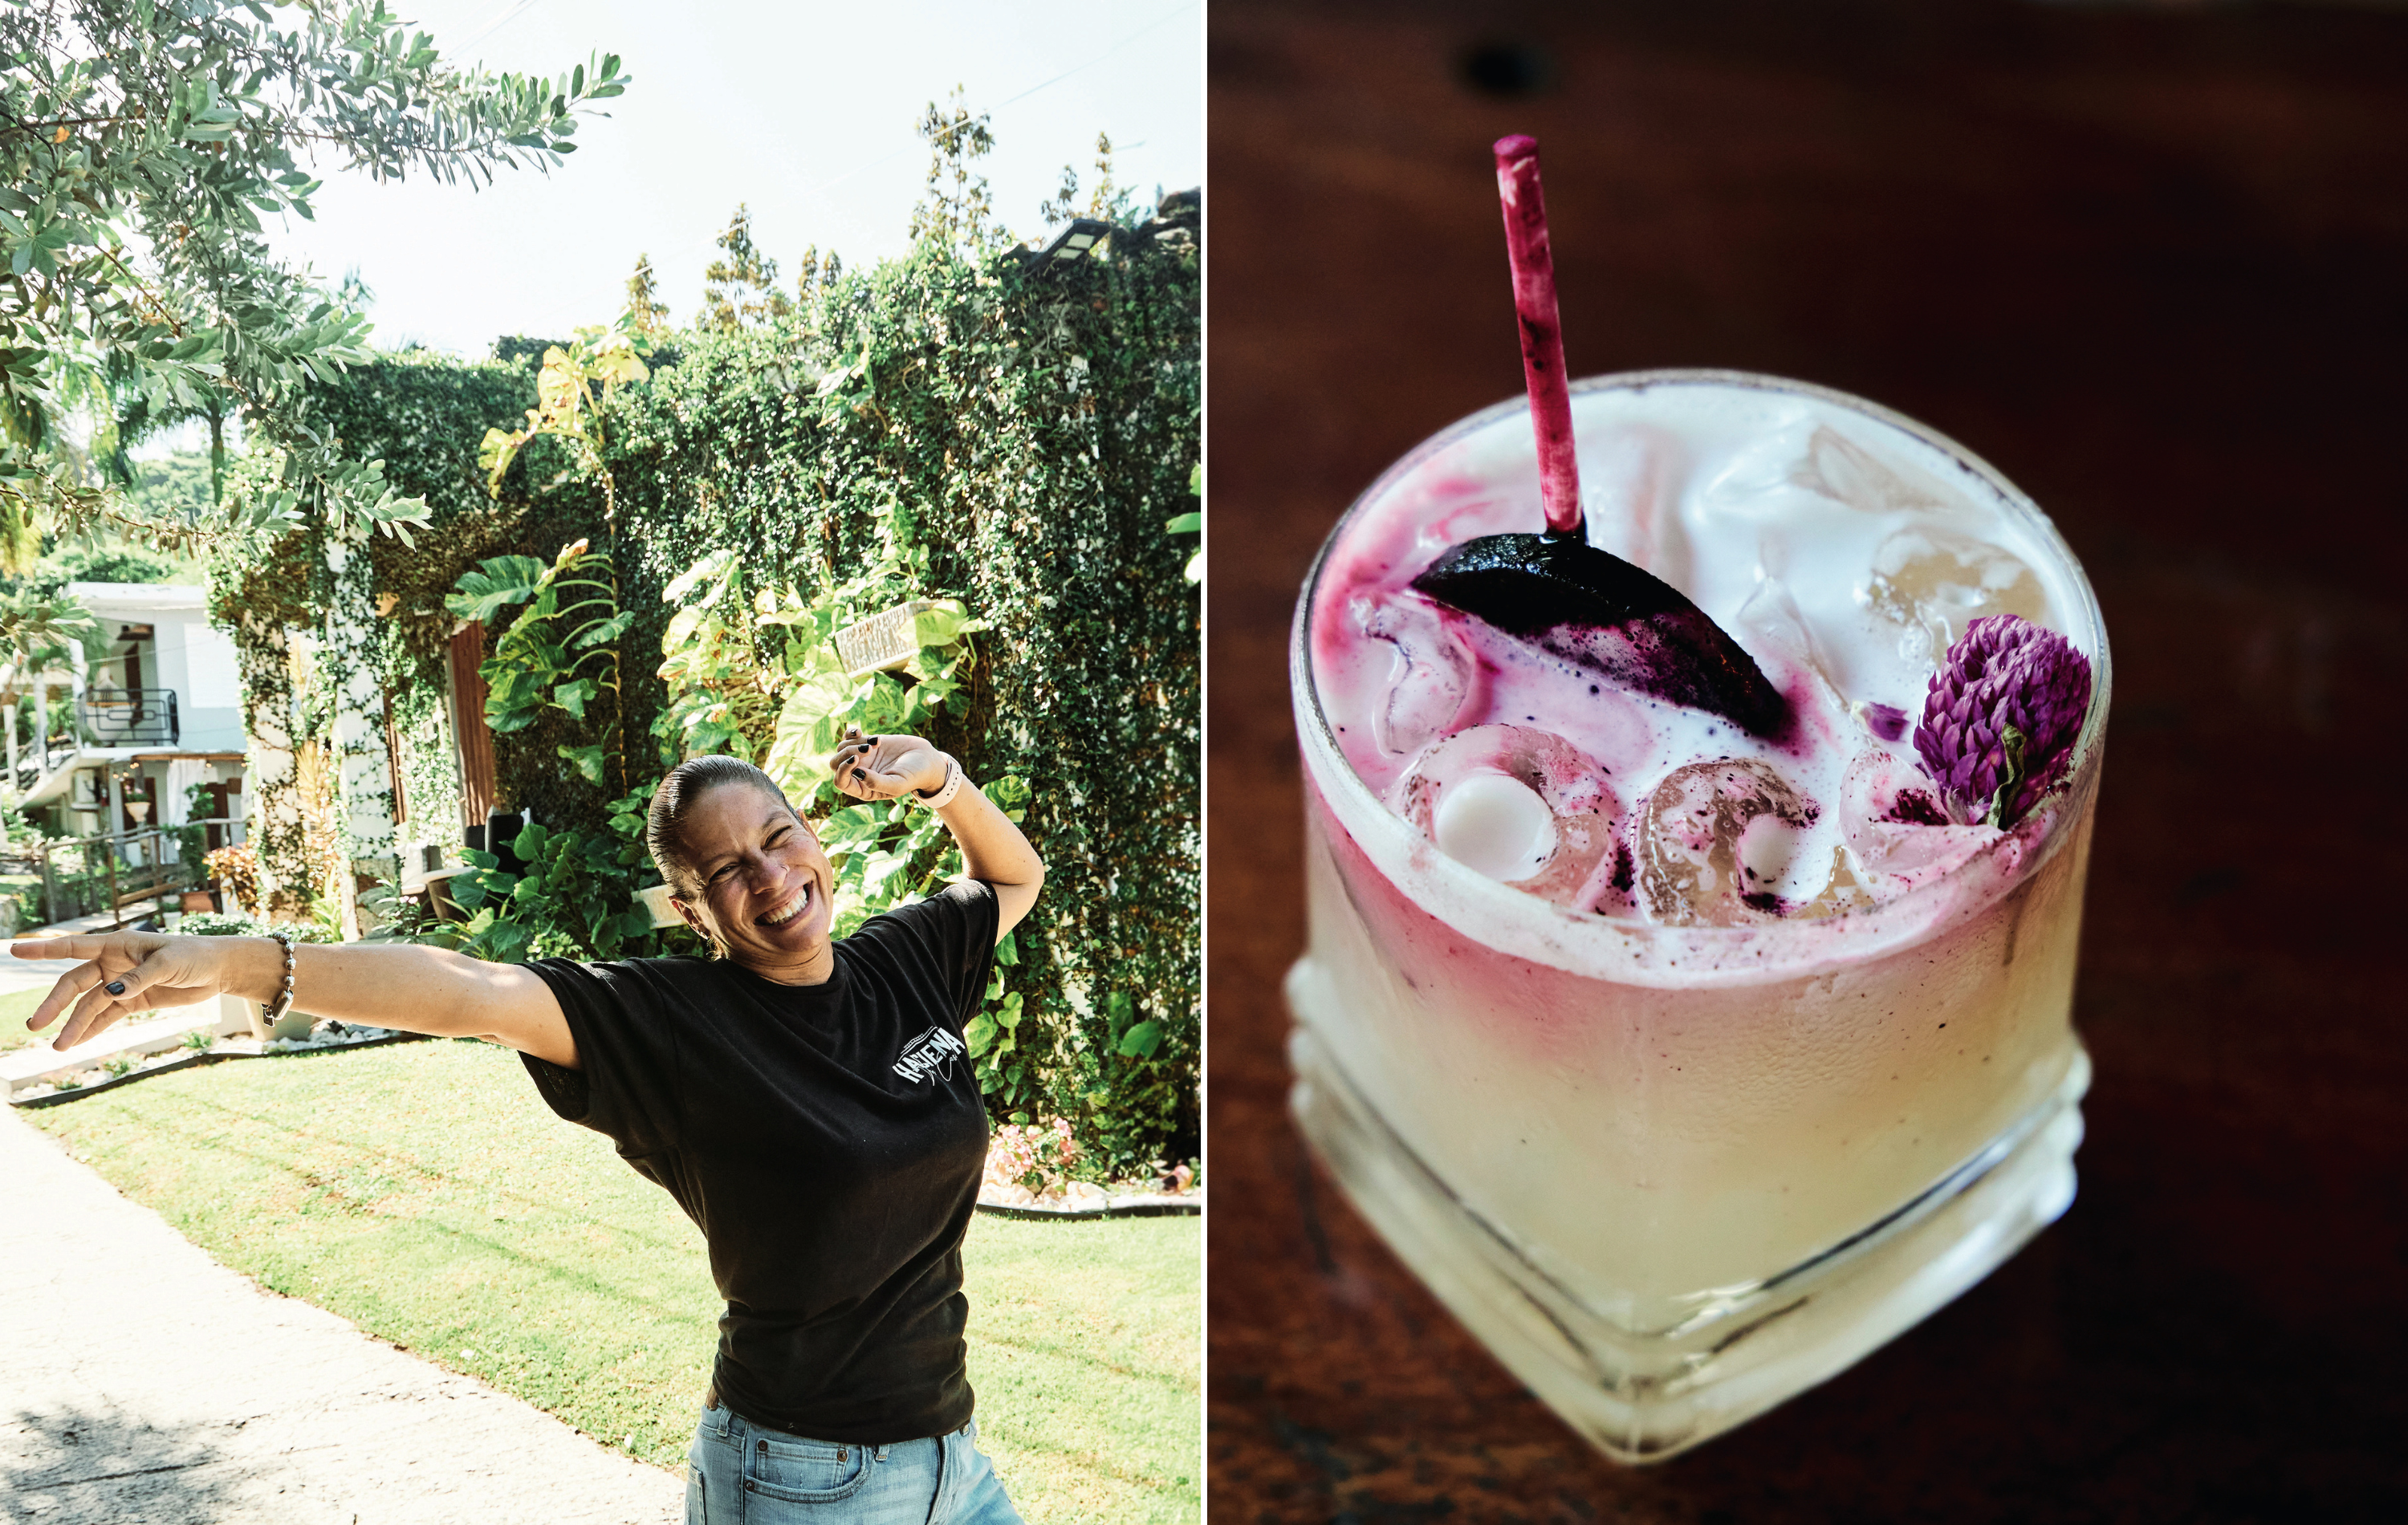 A collage of two images. Left: A woman raises her arms and smiles, wearing a black shirt. Right: A foamy cocktail with purple clover and powder.